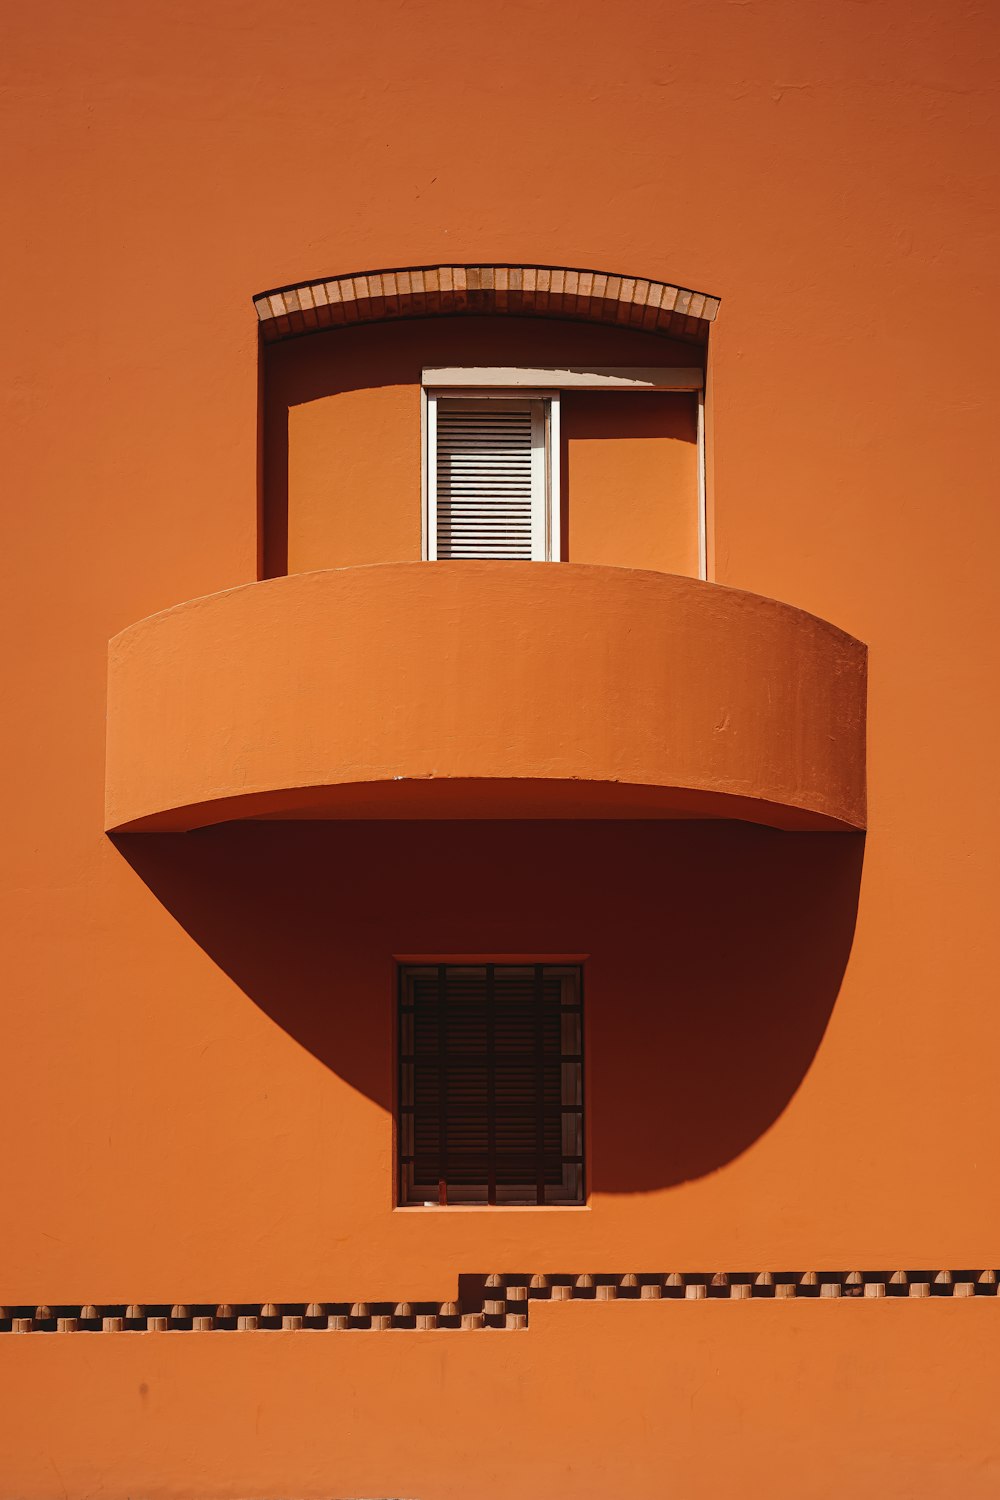 an orange building with a round window and balconies